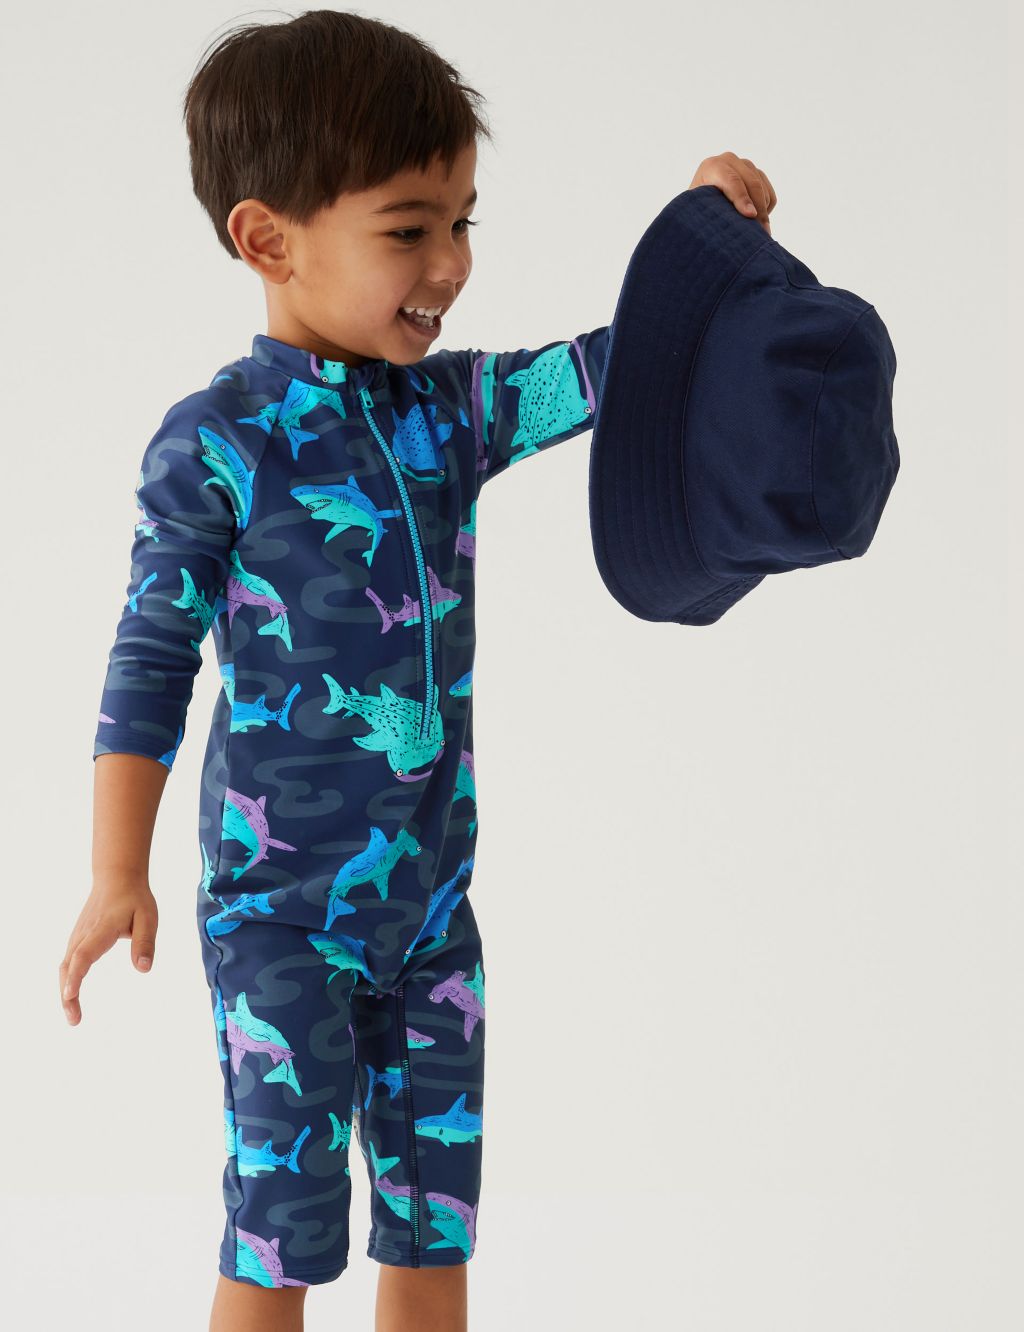 Shark Print All In One (2-8 Yrs) image 2